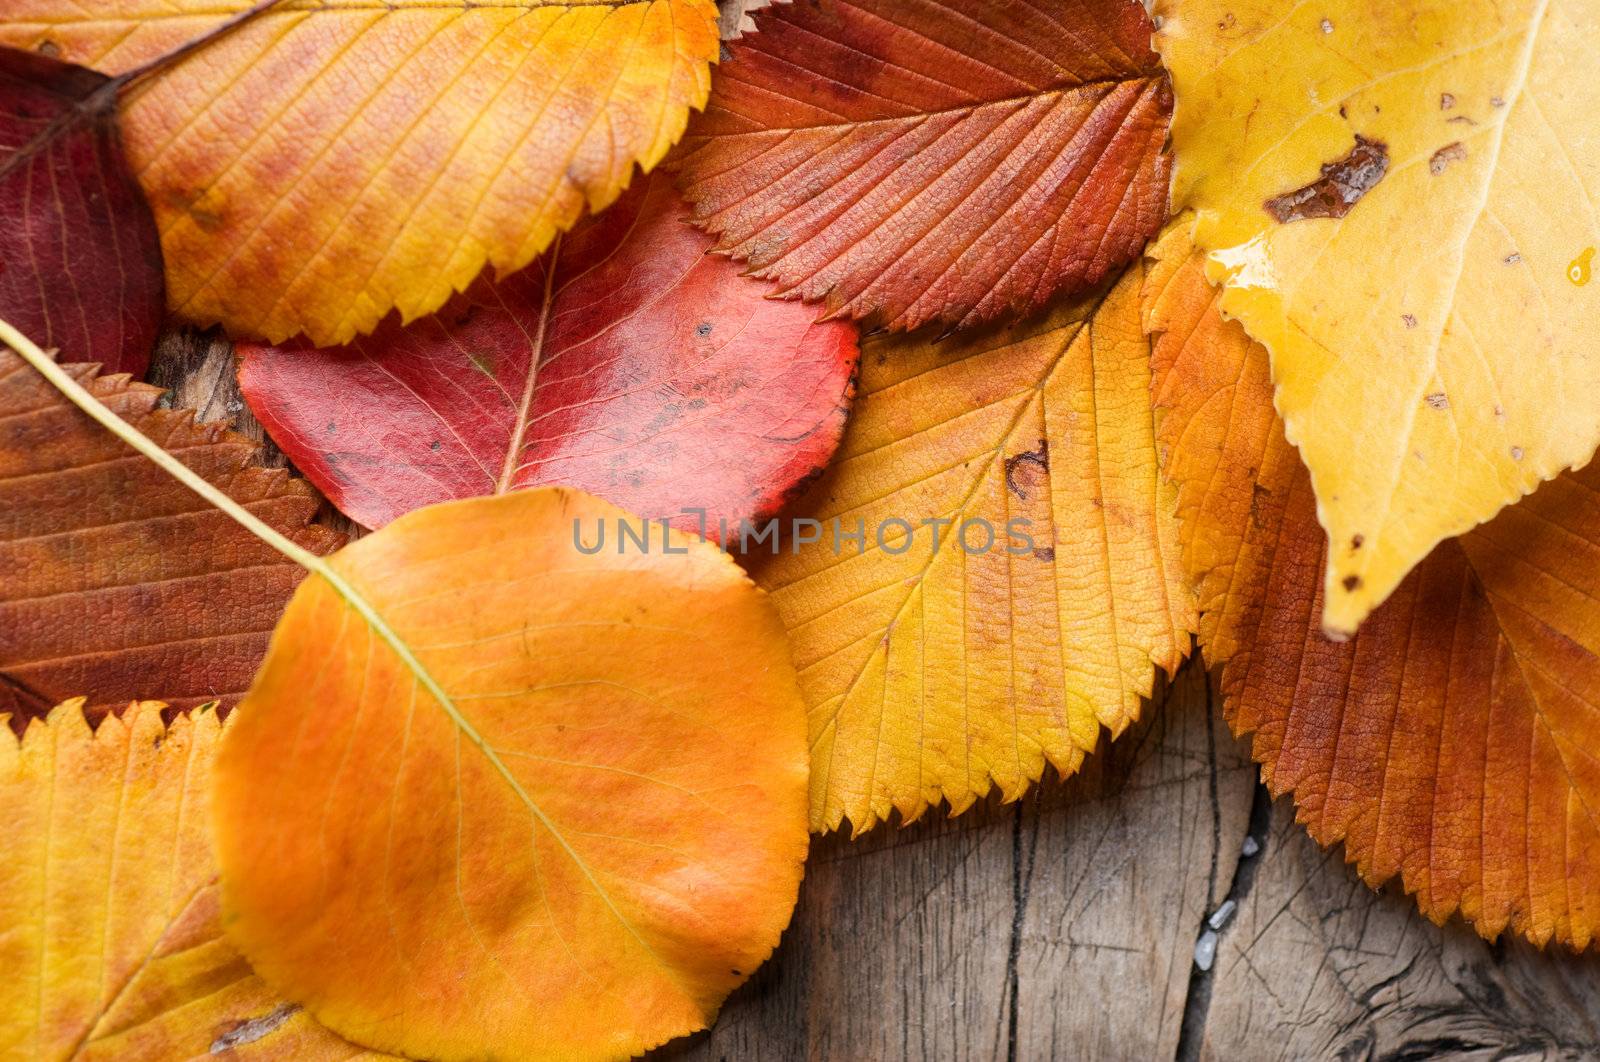 Autumn Leaves over wooden background by SubbotinaA